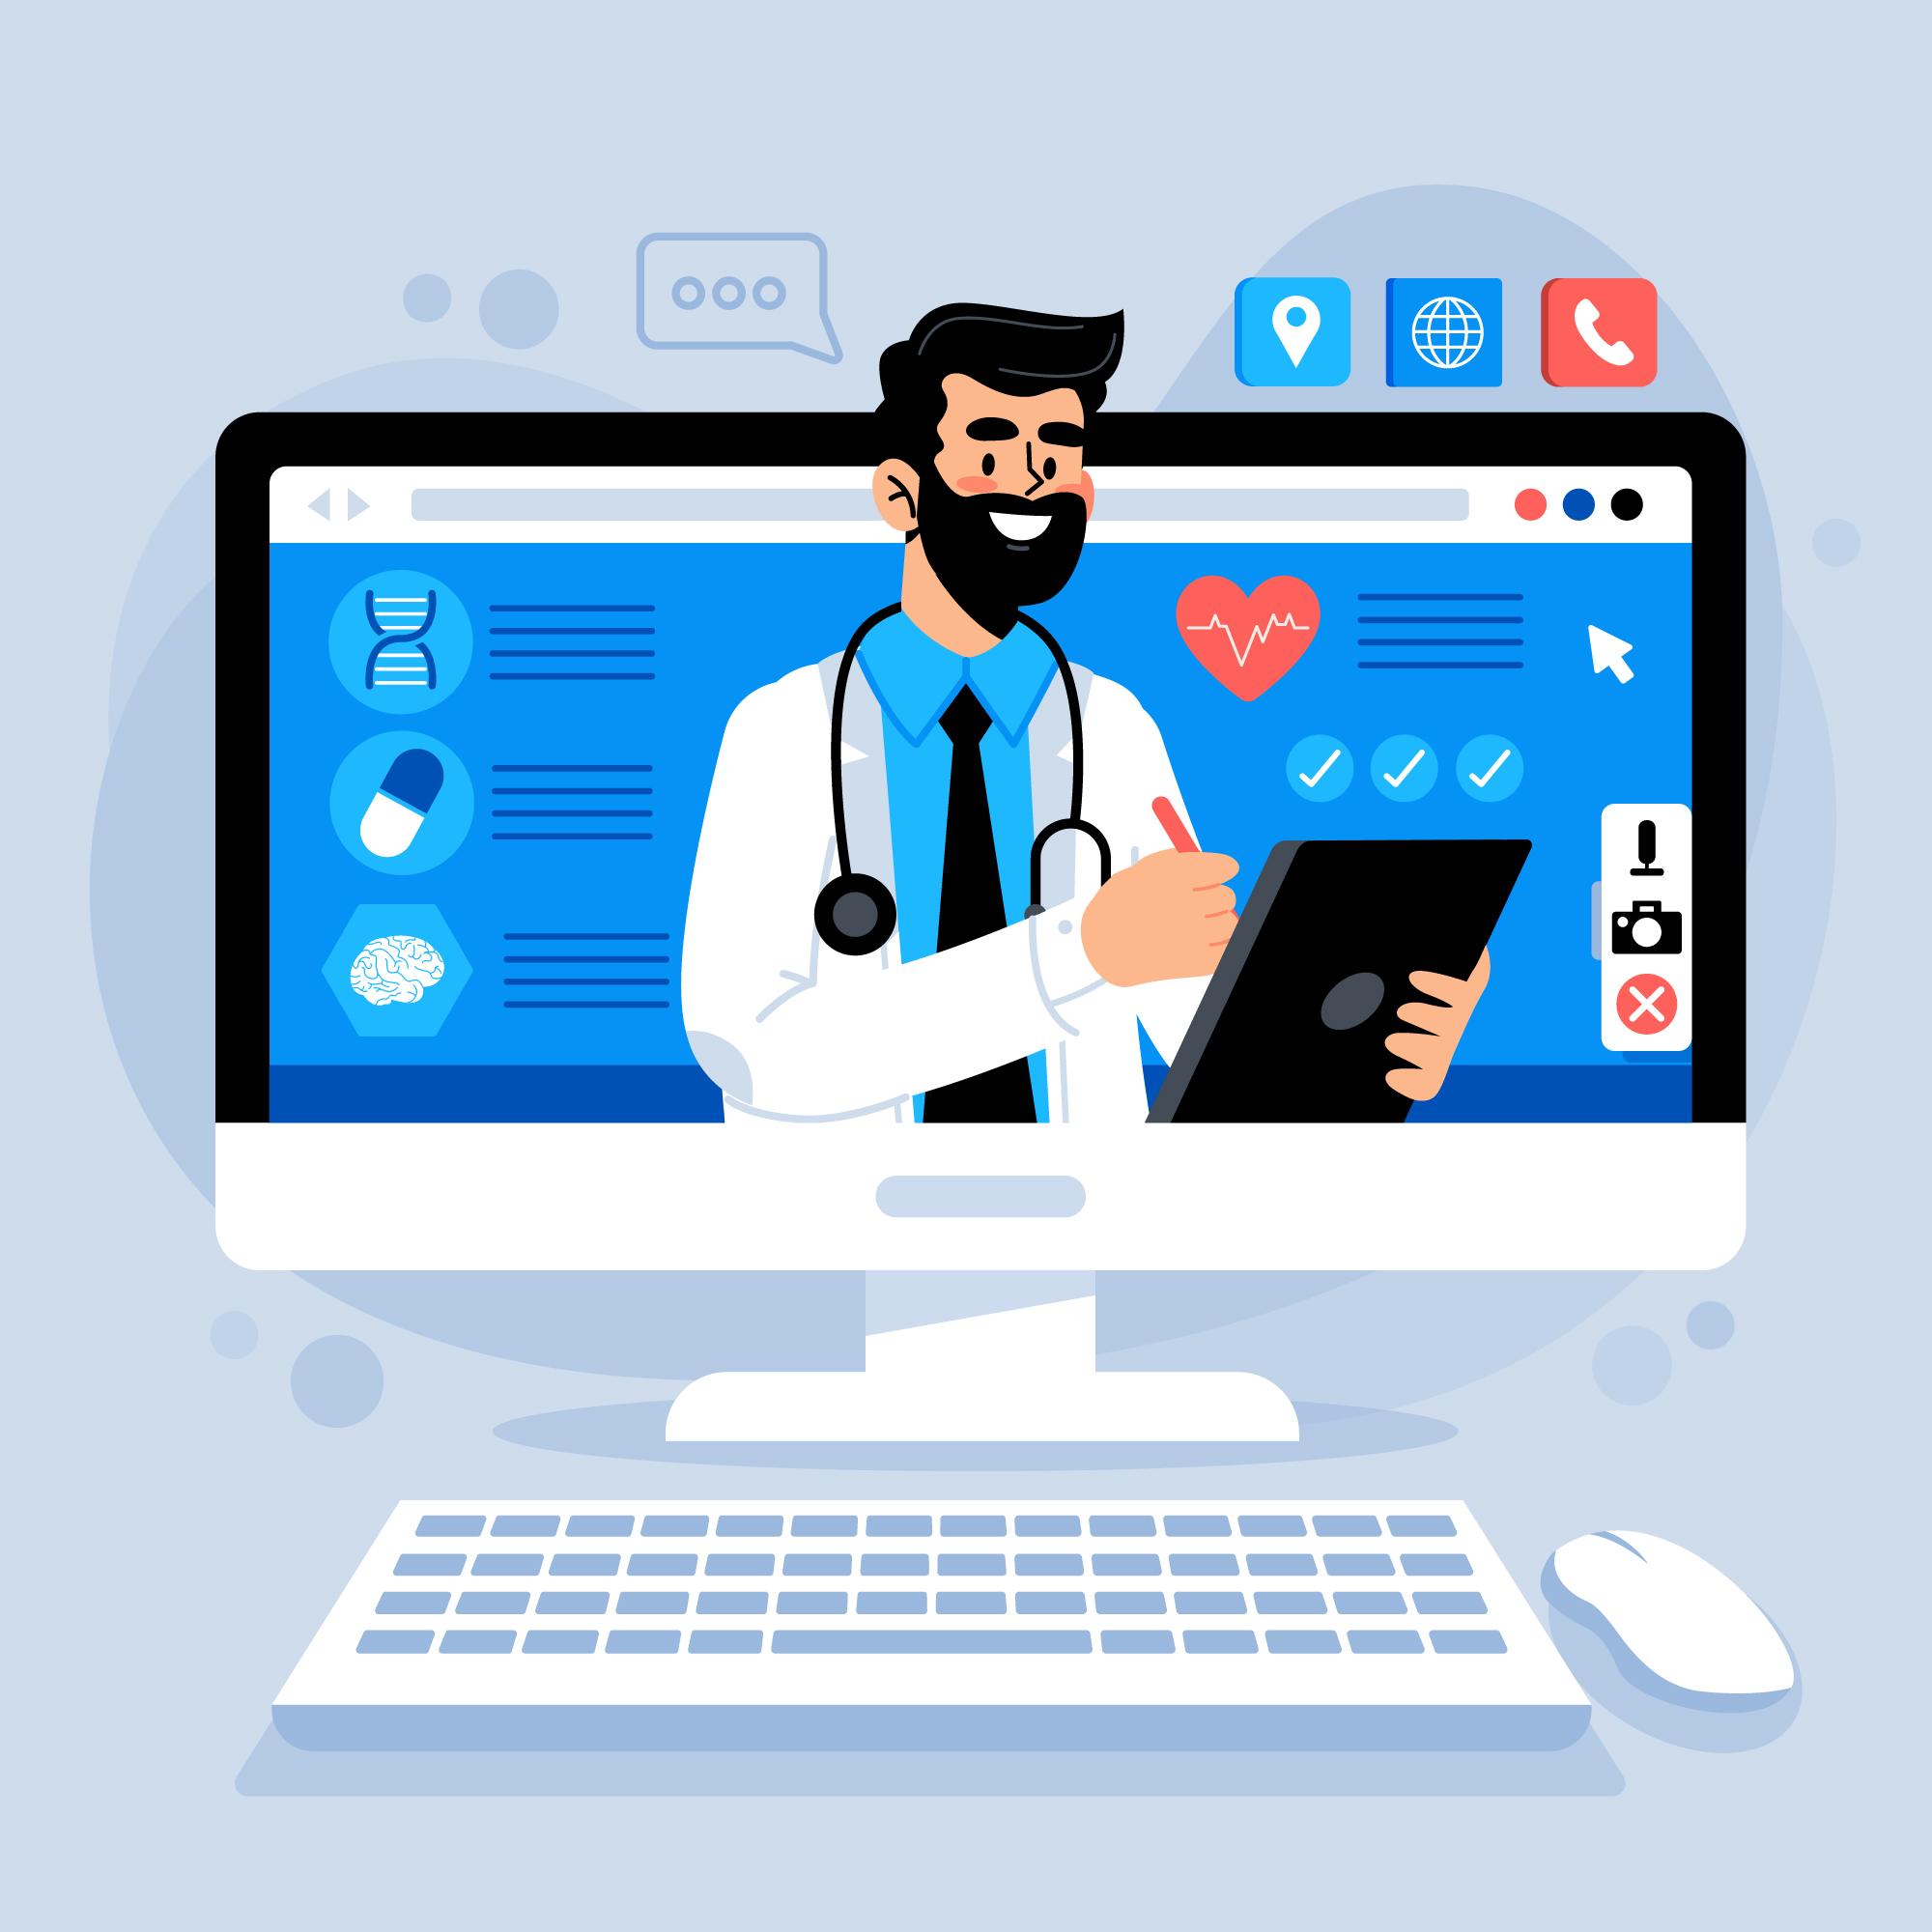 Online platforms are important for doctors. Why?